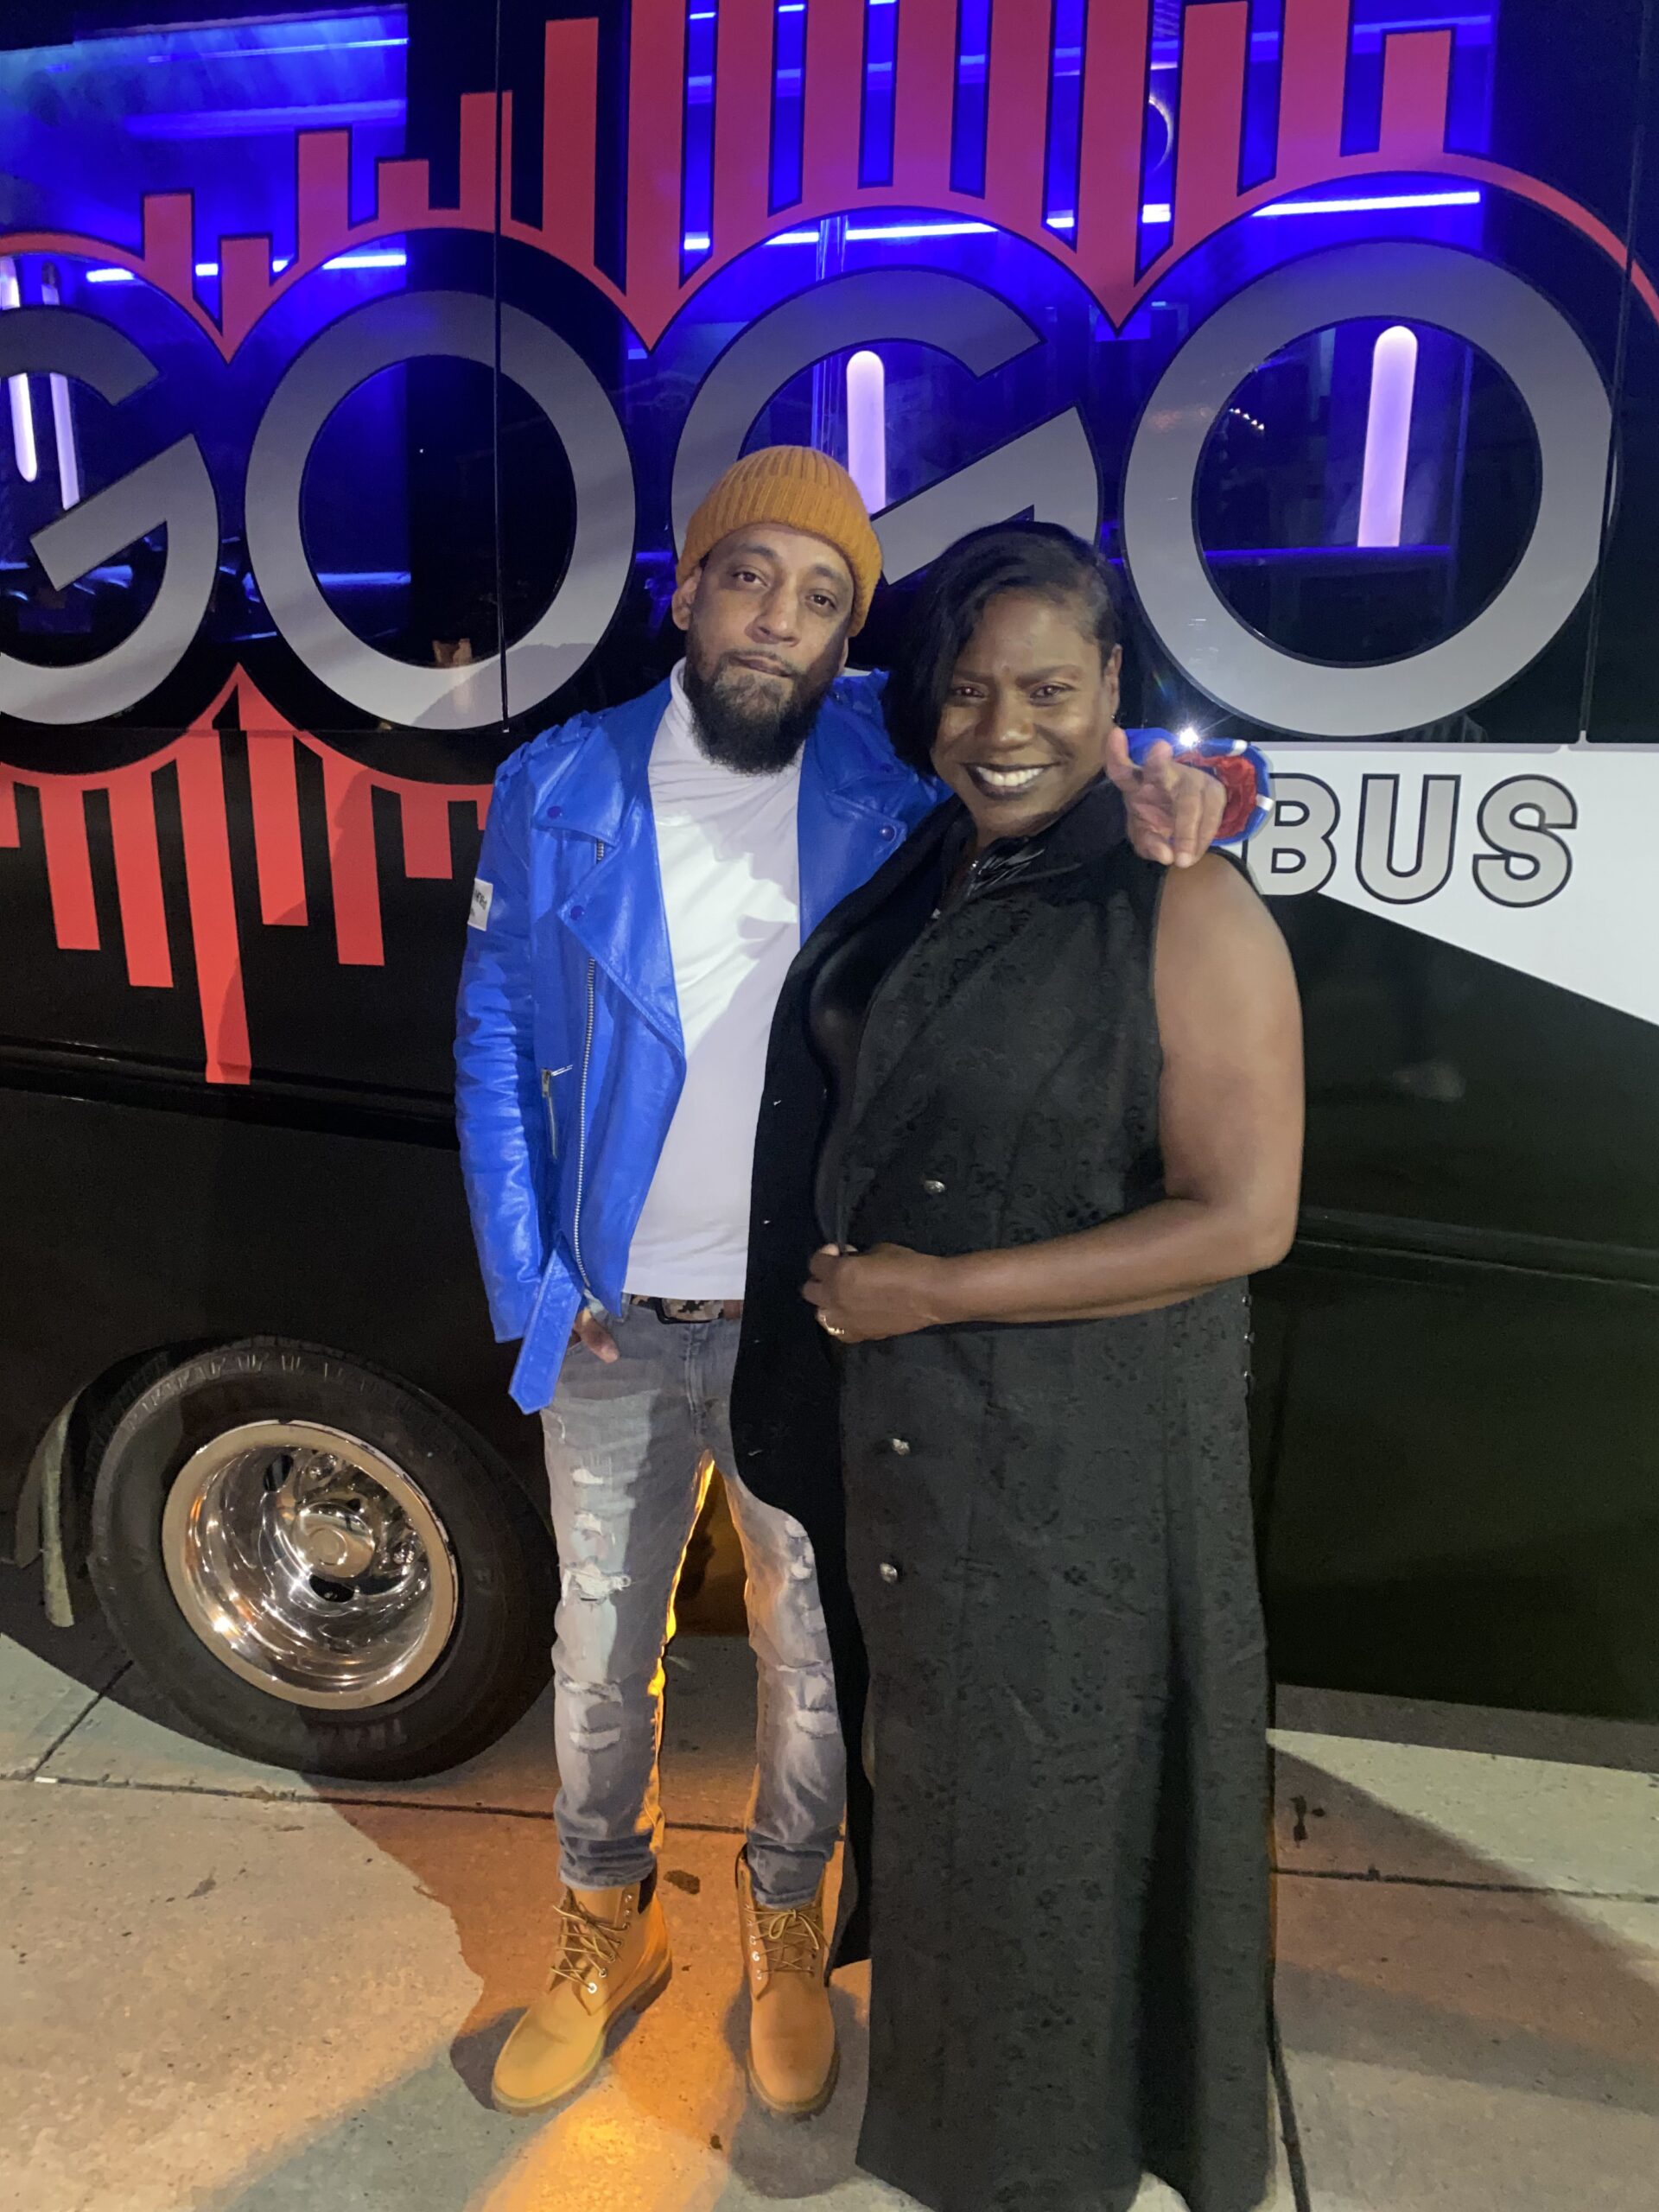 GoGo Party Bus “On The Go” Concert Series Masked Singer Edition Welcomes Spooky Halloween Season At Kat’s Cafe with J. Holiday